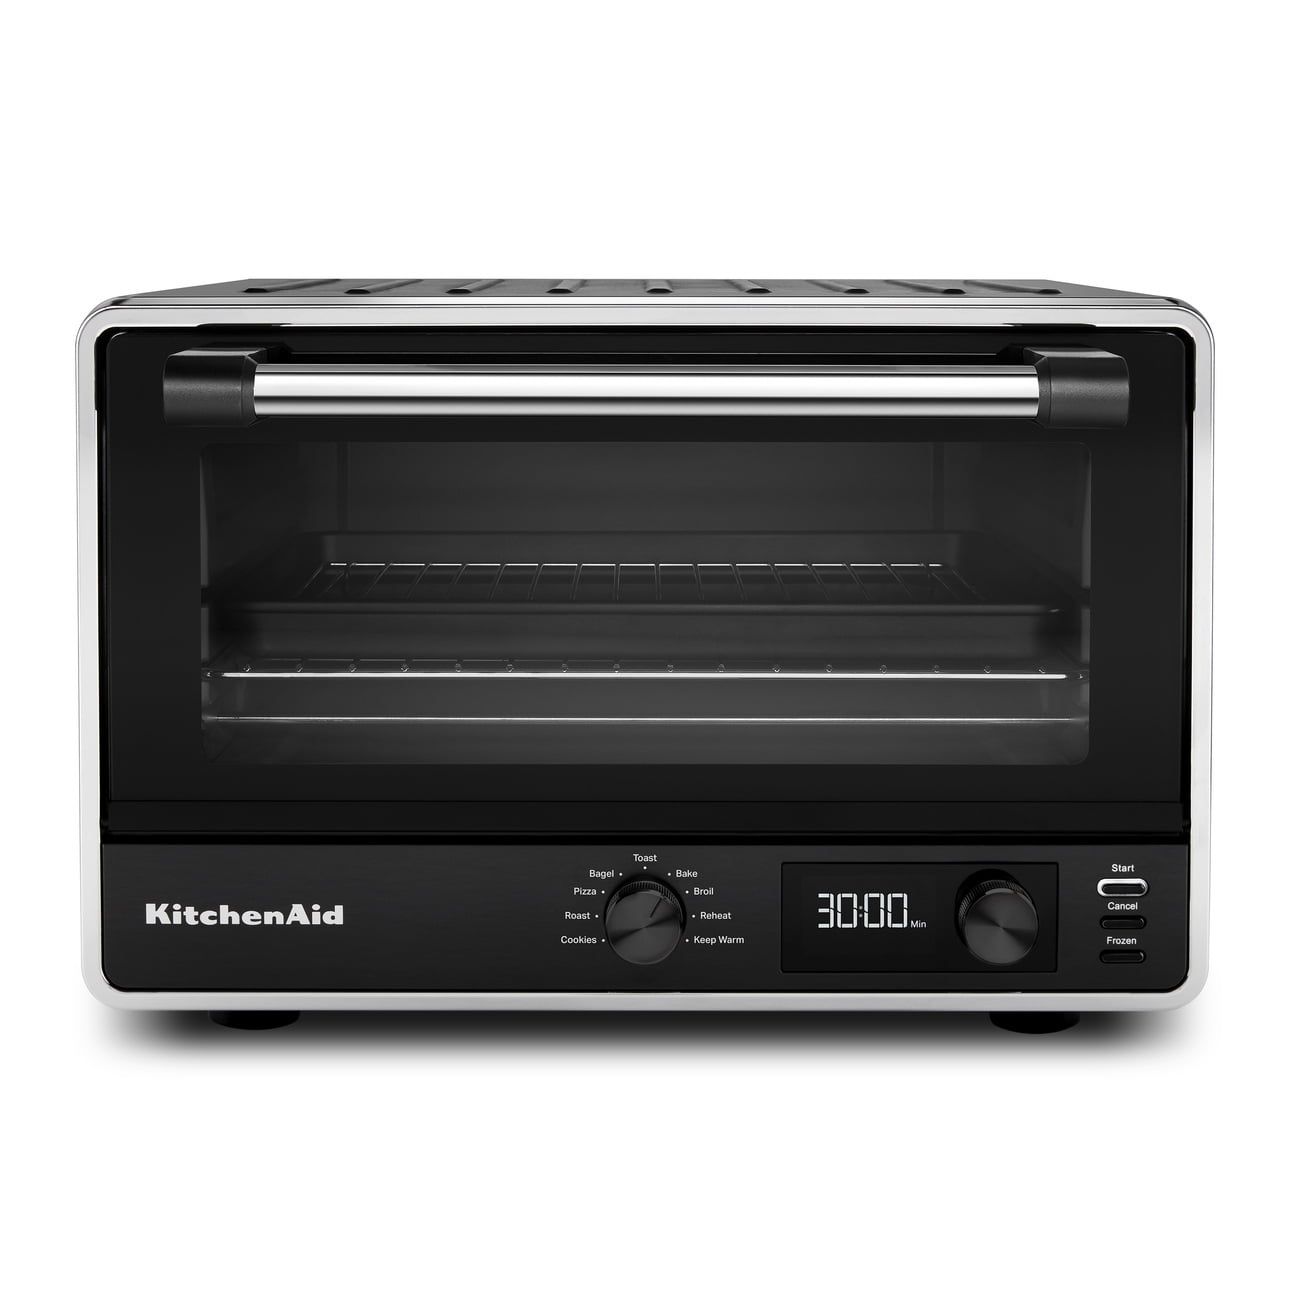 Best toaster oven for versatility